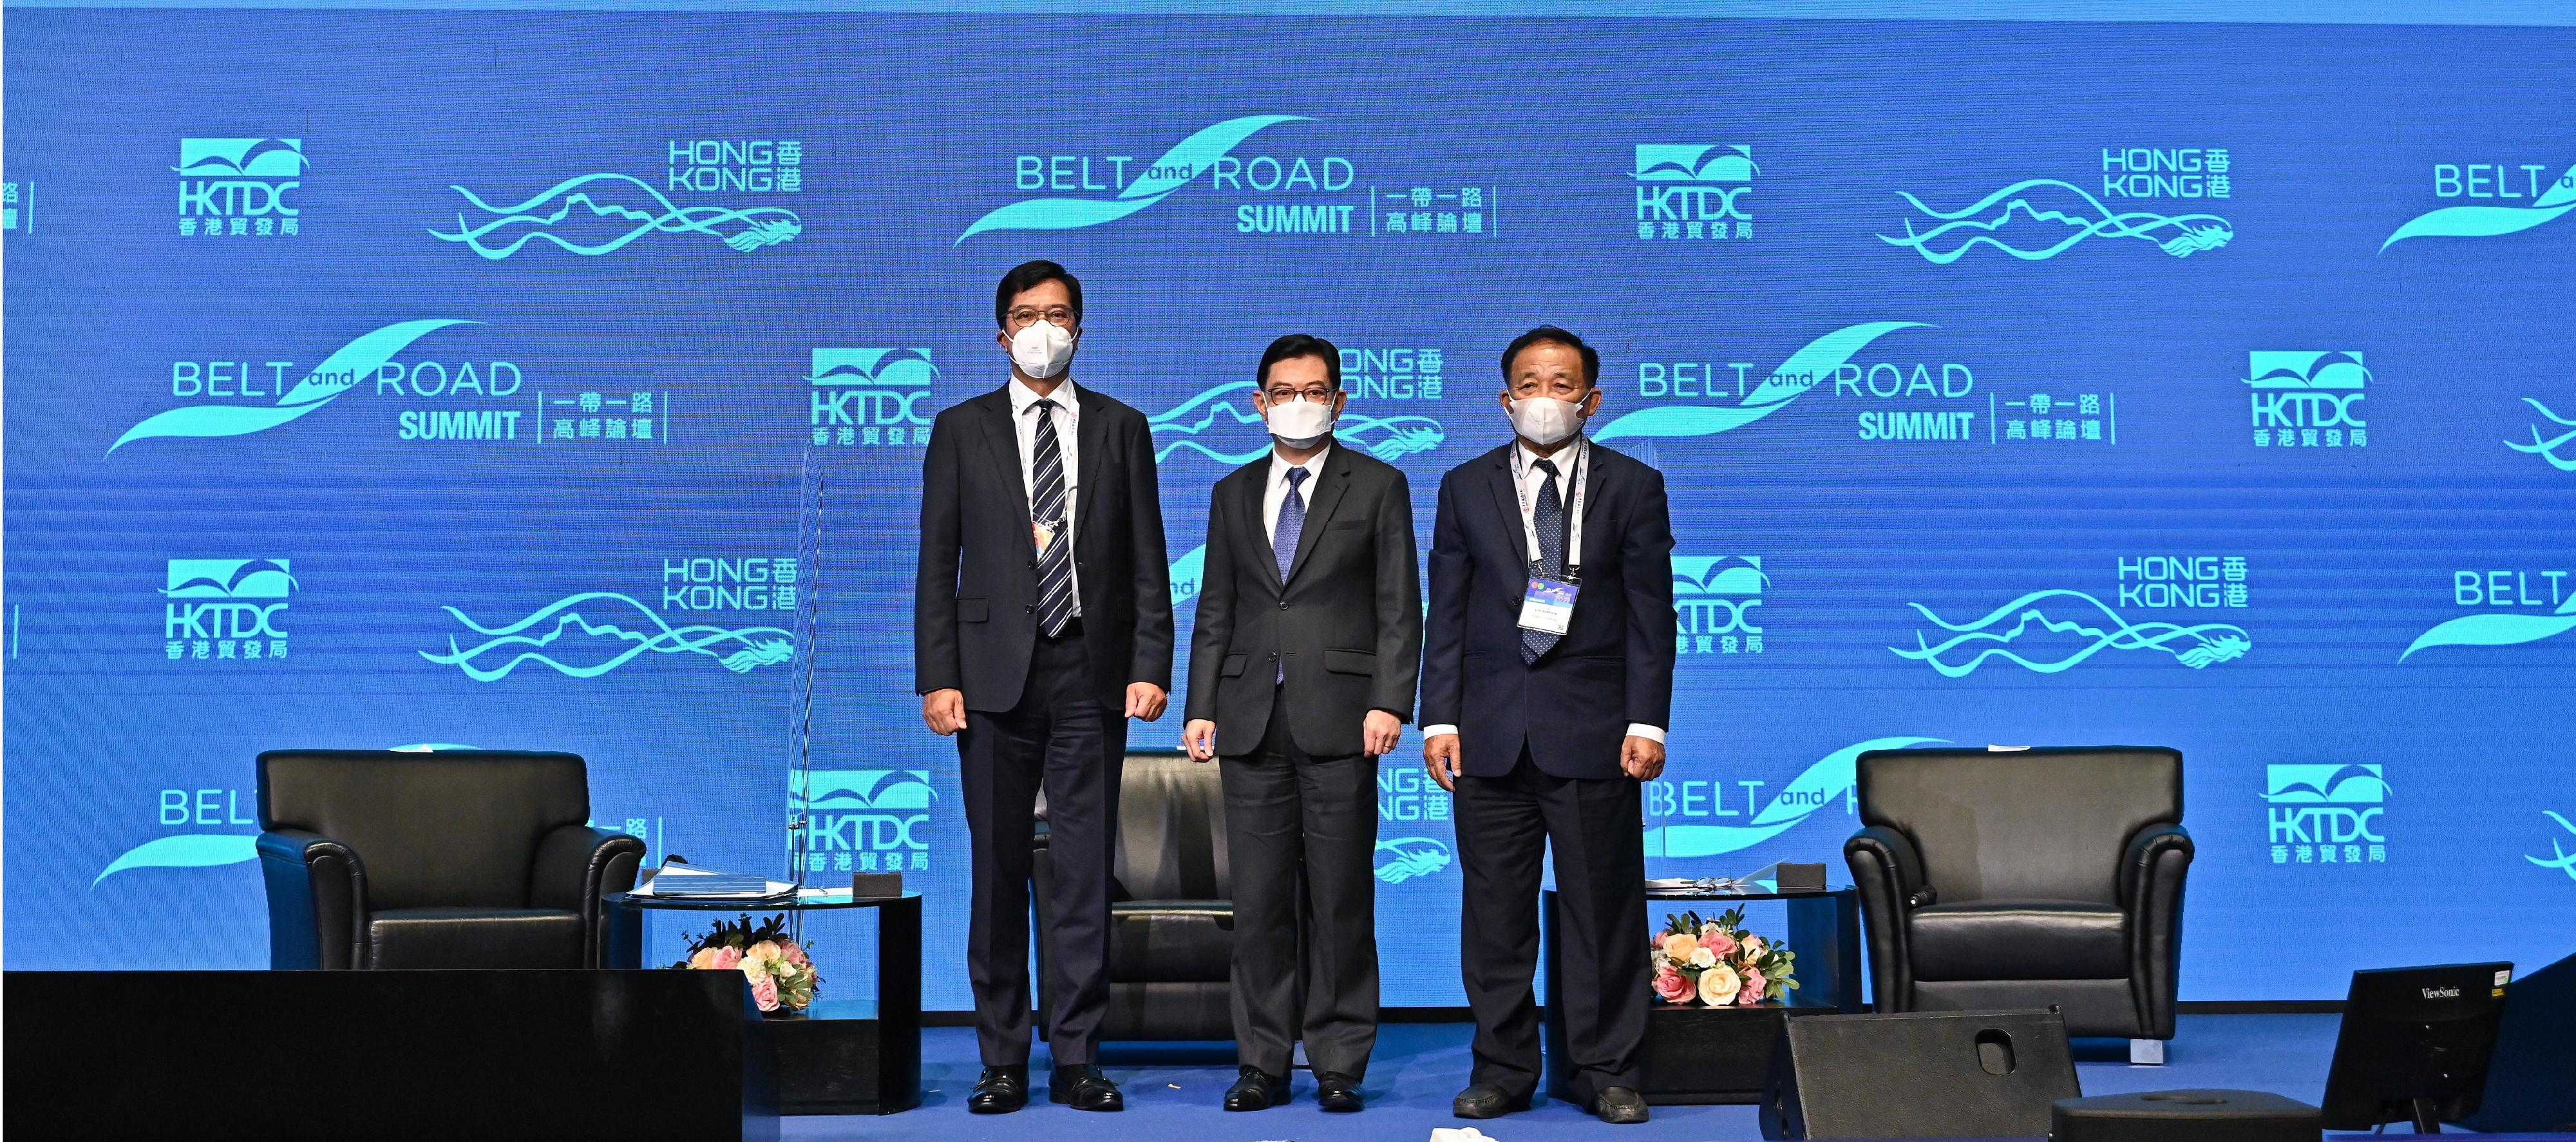 The seventh Belt and Road Summit opened today (August 31). The Deputy Financial Secretary, Mr Michael Wong, chaired the policy dialogue session titled "Driving Growth through Partnership and Collaboration". Mr Wong (left) is pictured with the Deputy Prime Minister and Coordinating Minister for Economic Policies of Singapore, Mr Heng Swee Keat (centre), and the Secretary of State of the Ministry of Public Works and Transport of Cambodia, HE Lim Sidenine (right), after the dialogue session.